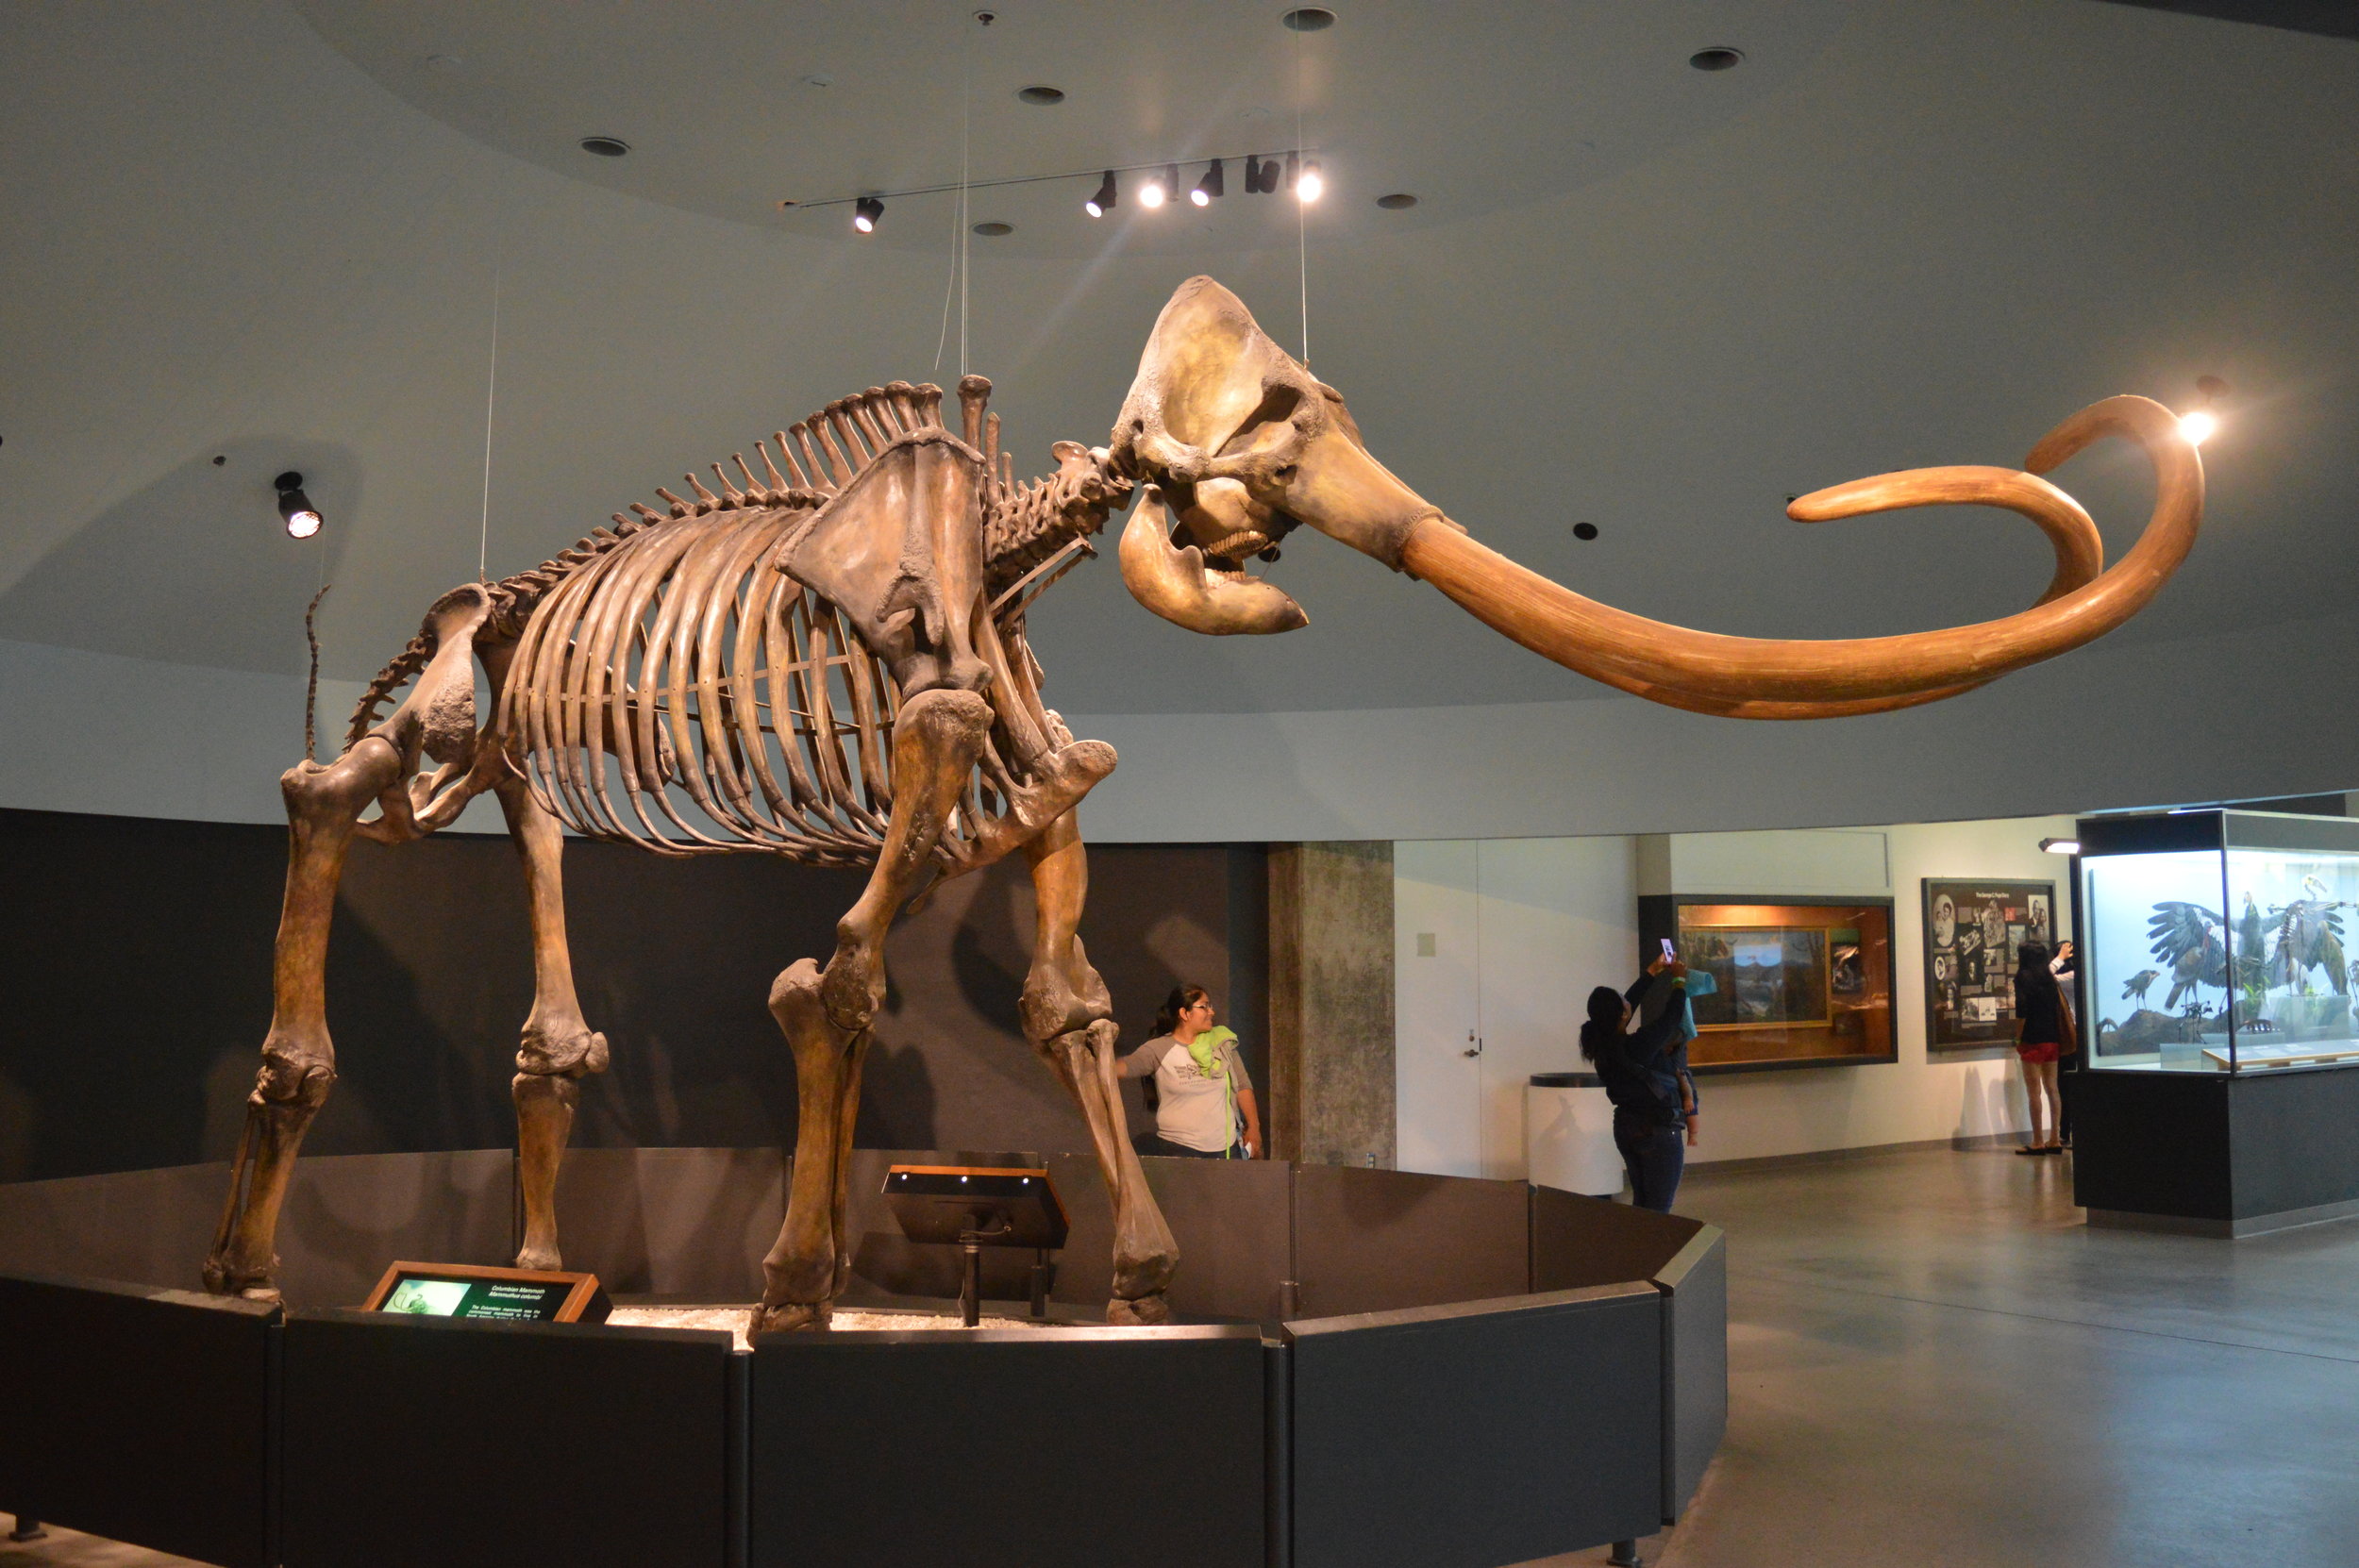  When Bill Nye tells you to visit the La Brea Tar Pits and Museum, that’s exactly what you do. © Andrew Katsis 